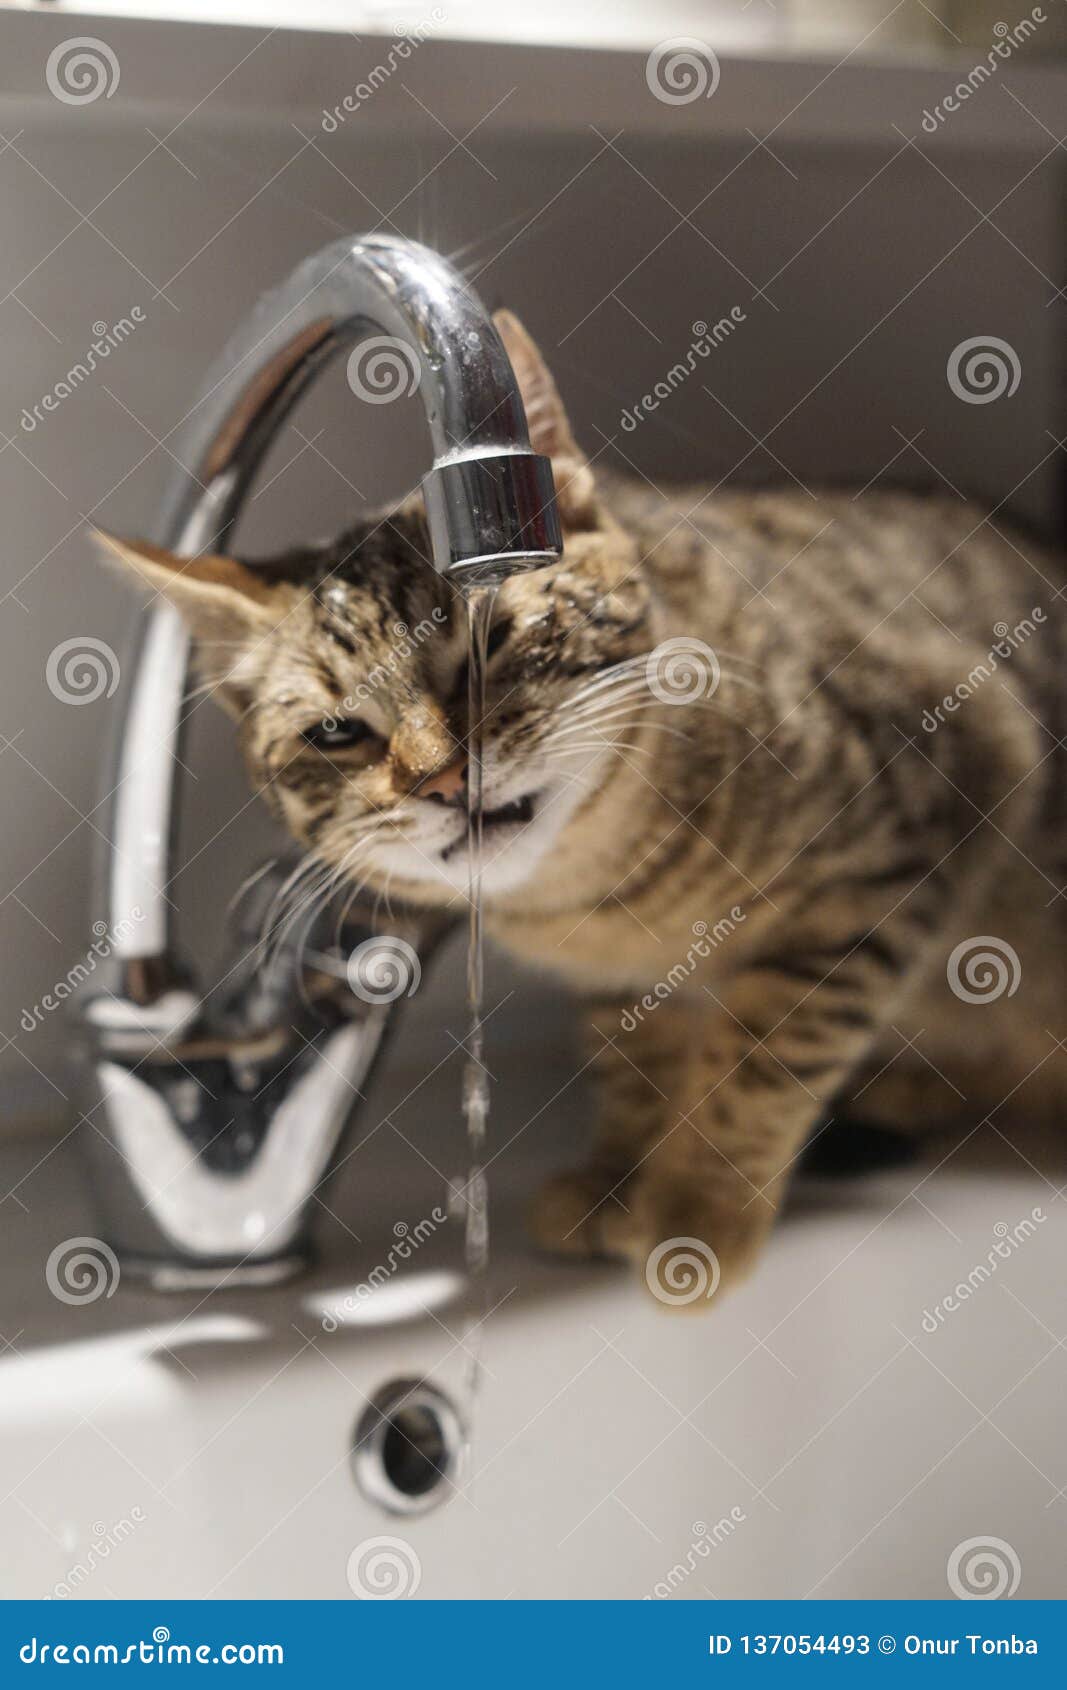 Adorable Cat Drinking From A Faucet Stock Image Image of domestic